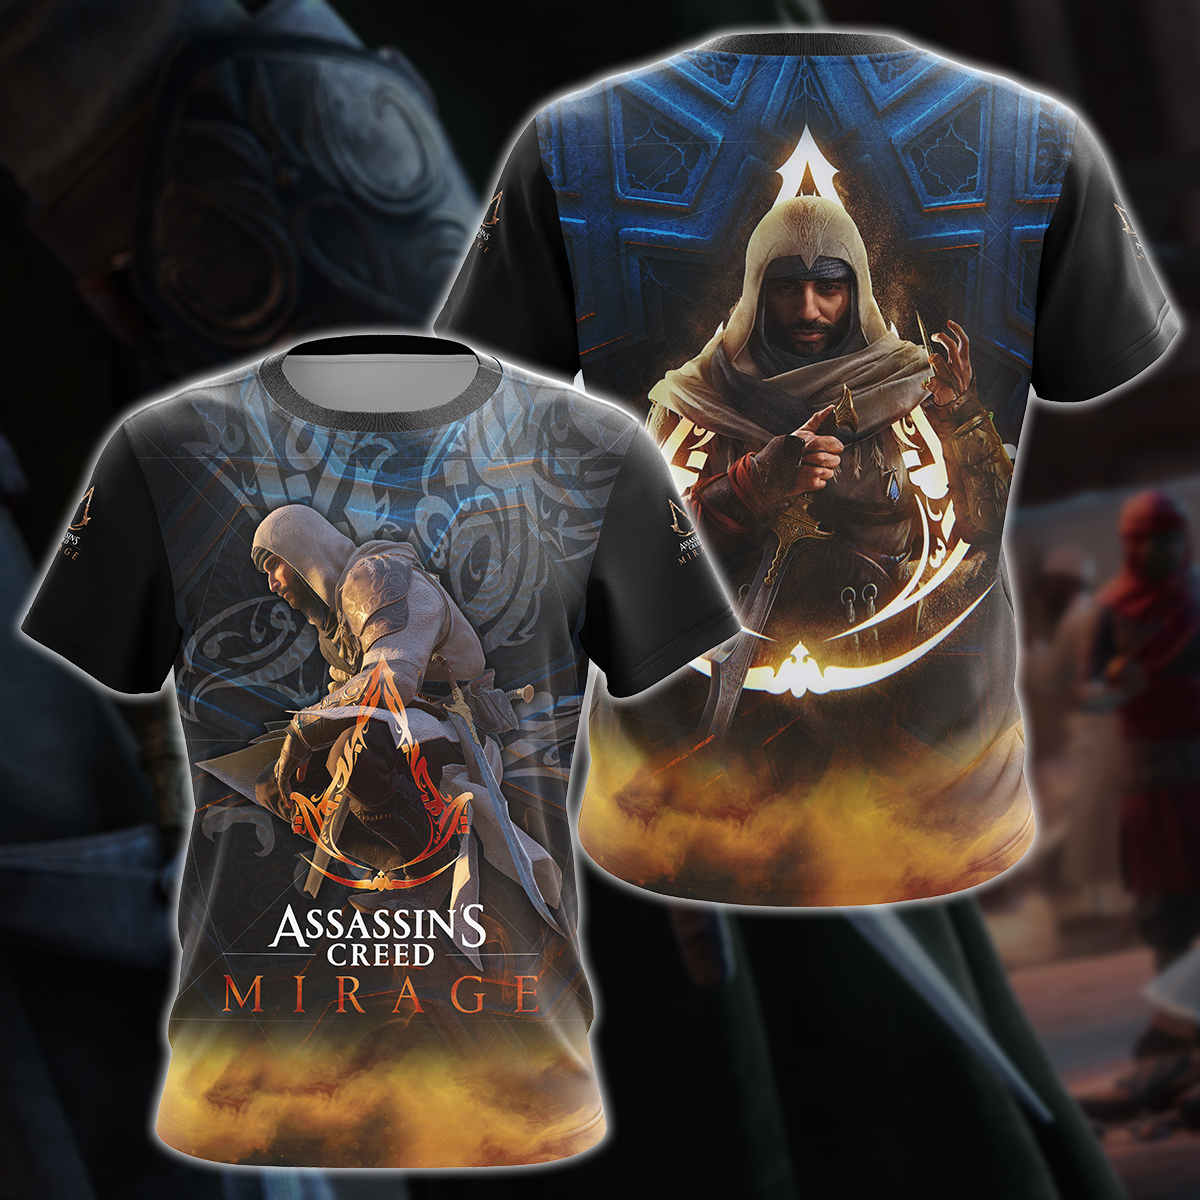 Assassin's Creed Mirage Video Game All Over Printed T-shirt Tank Top Zip Hoodie Pullover Hoodie Hawaiian Shirt Beach Shorts Joggers T-shirt S 